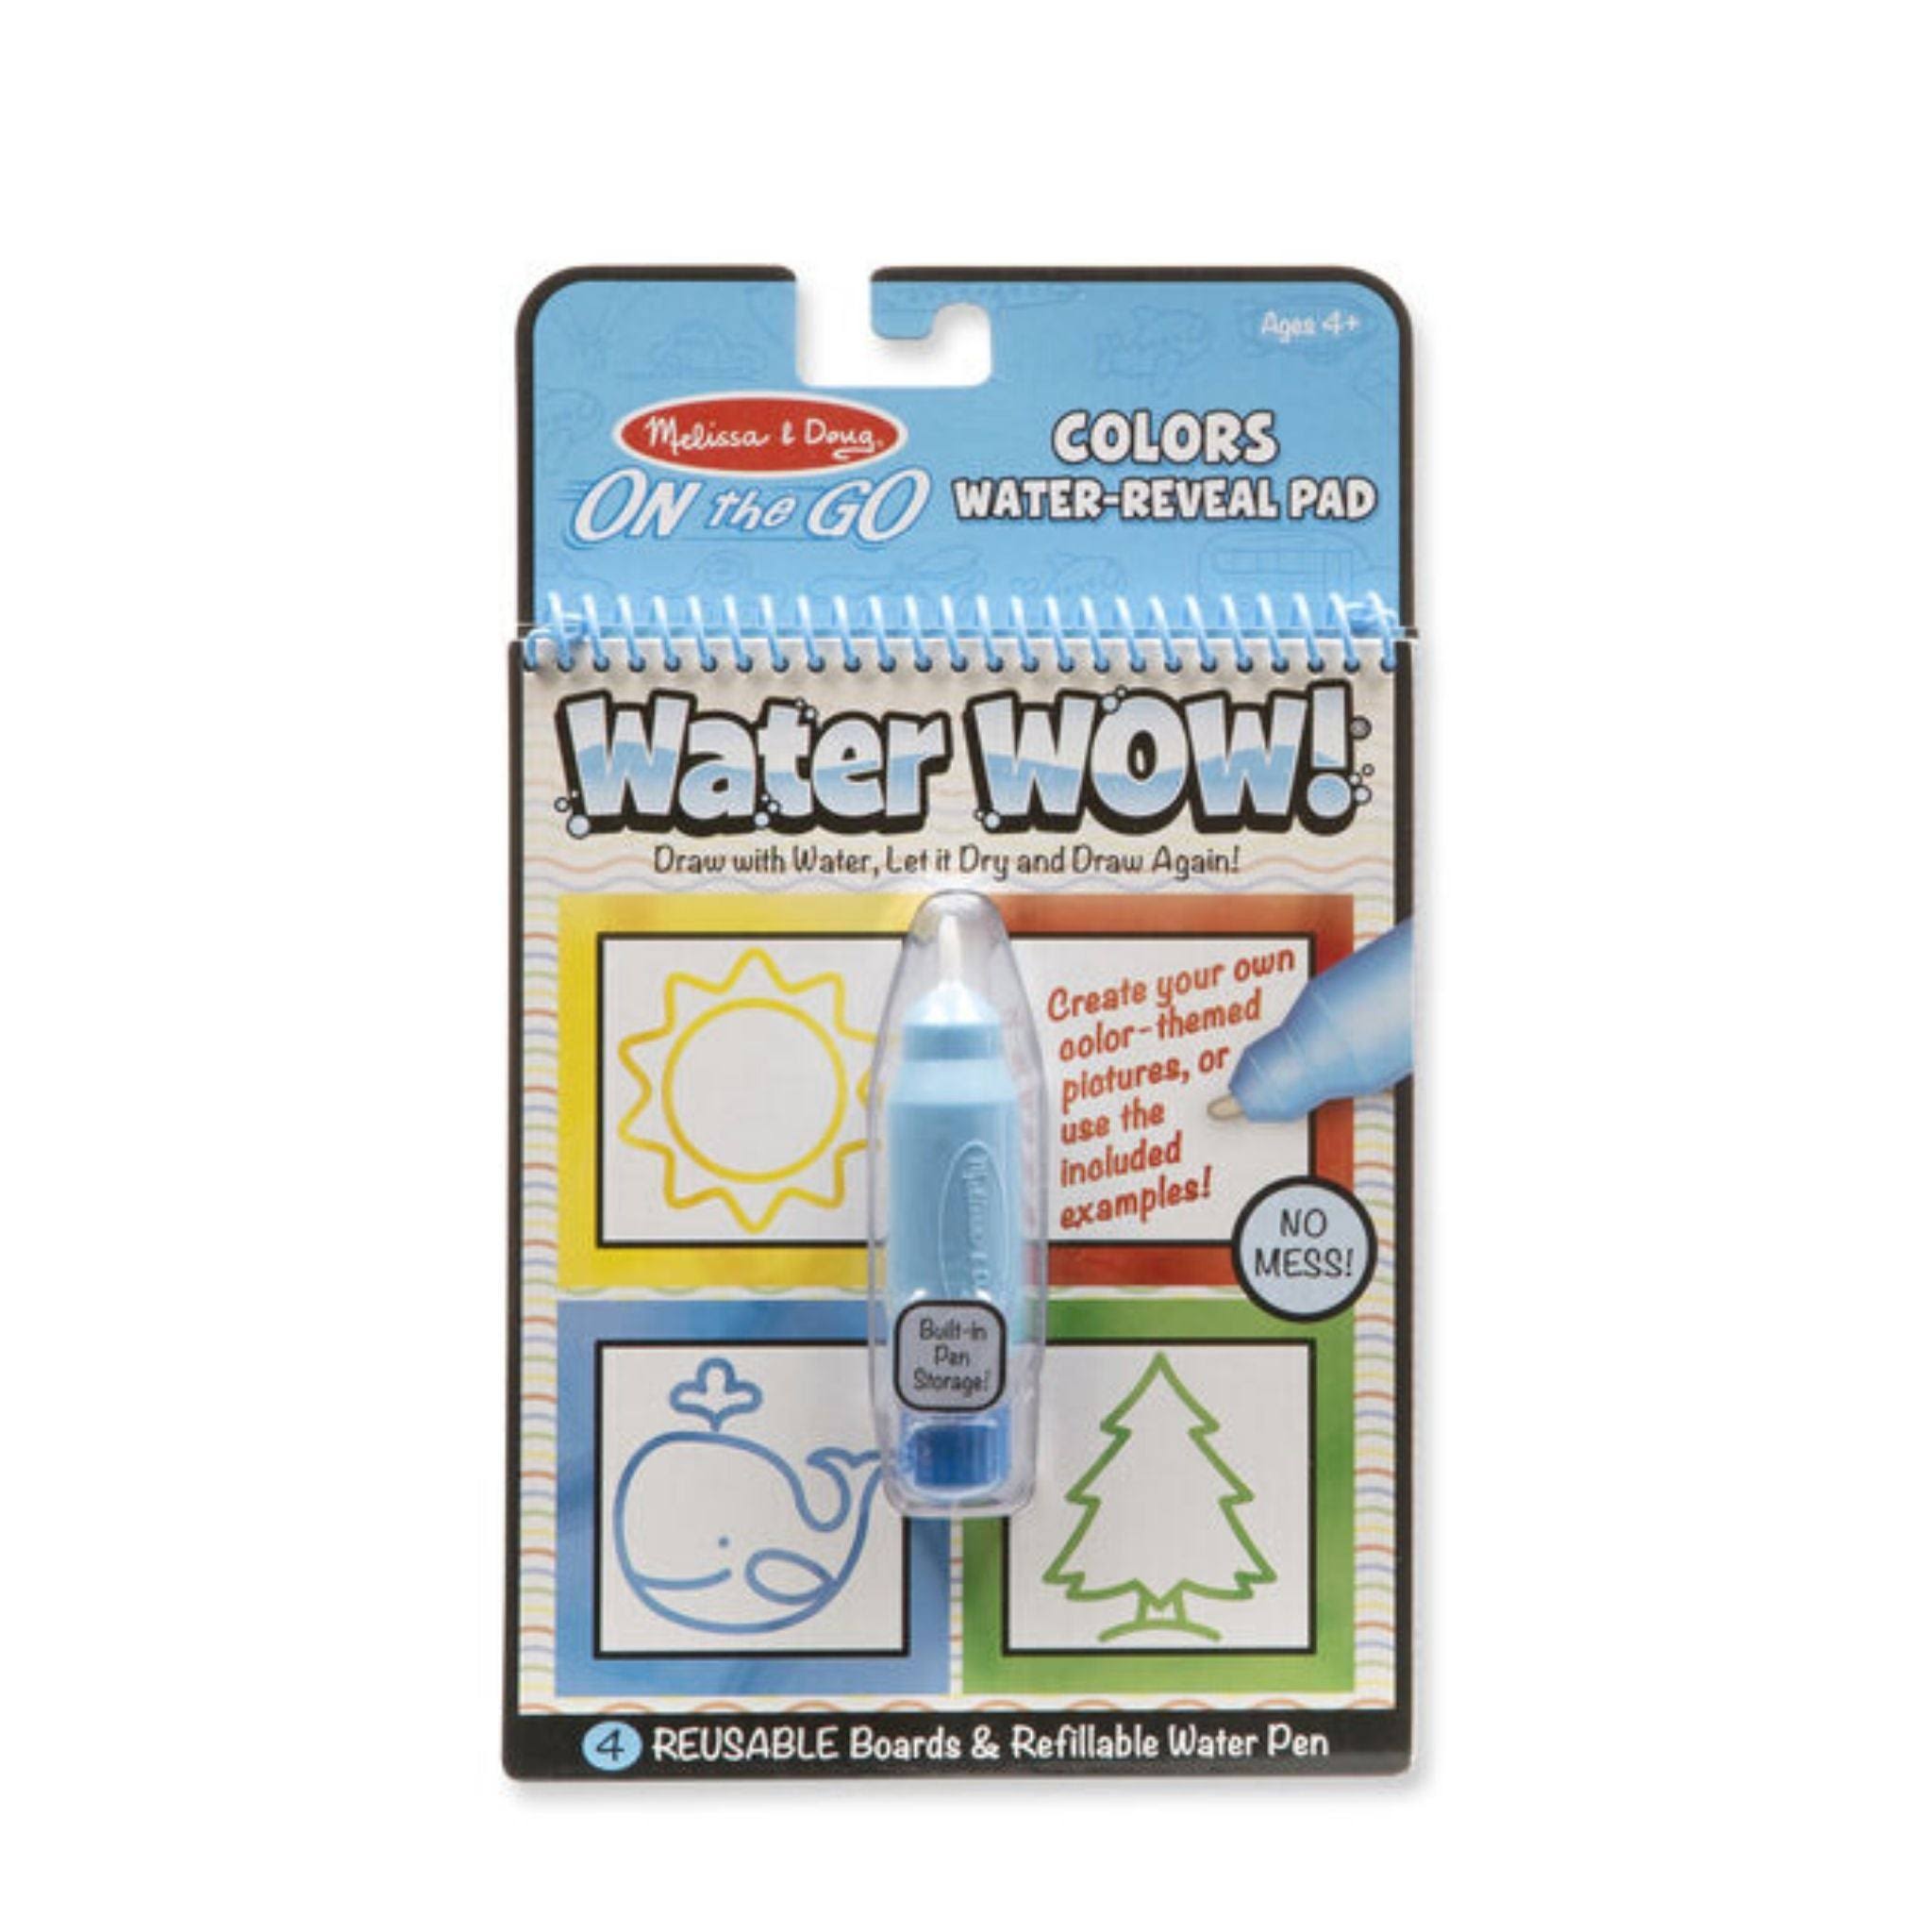 Melissa & Doug On The Go Water Wow! Activity Pad - Colors And Shapes